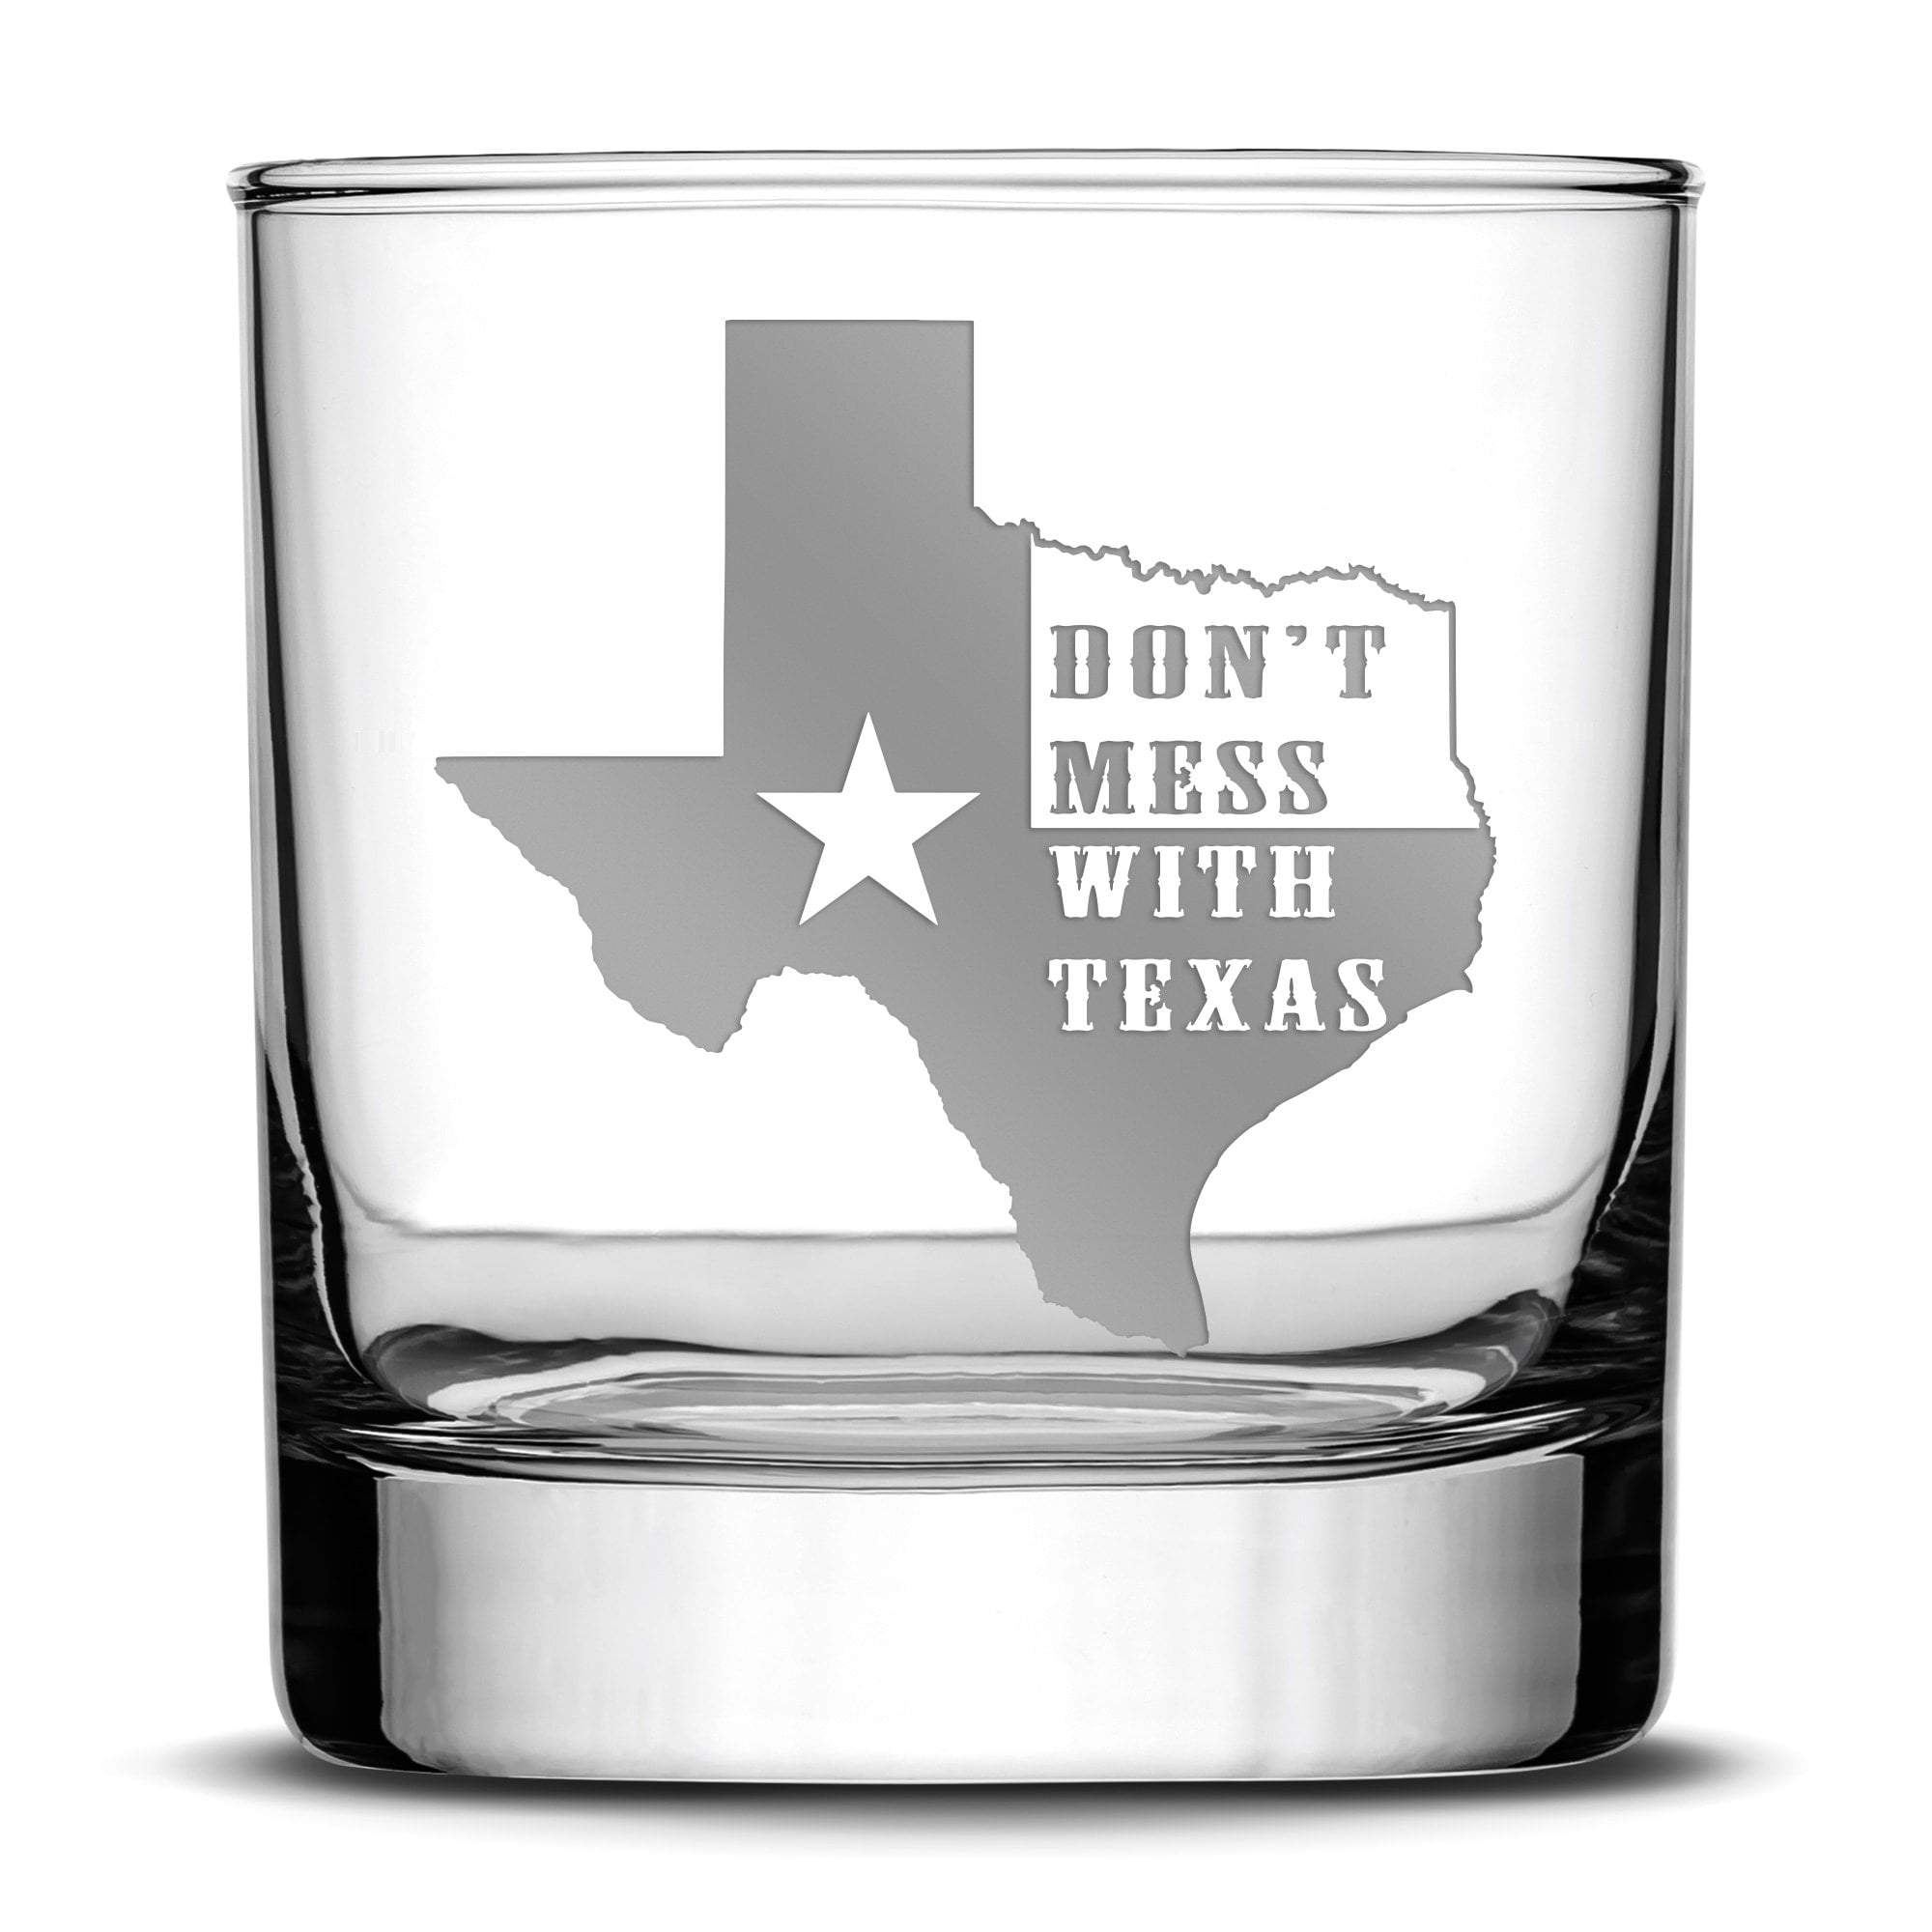 Silver Etch Premium "Don't Mess With Texas" Whiskey Glass - Hand-Etched Liquor Rocks Tumbler - Old Fashioned Unique Gifts for Men, Made in USA - 11oz Integrity Bottles